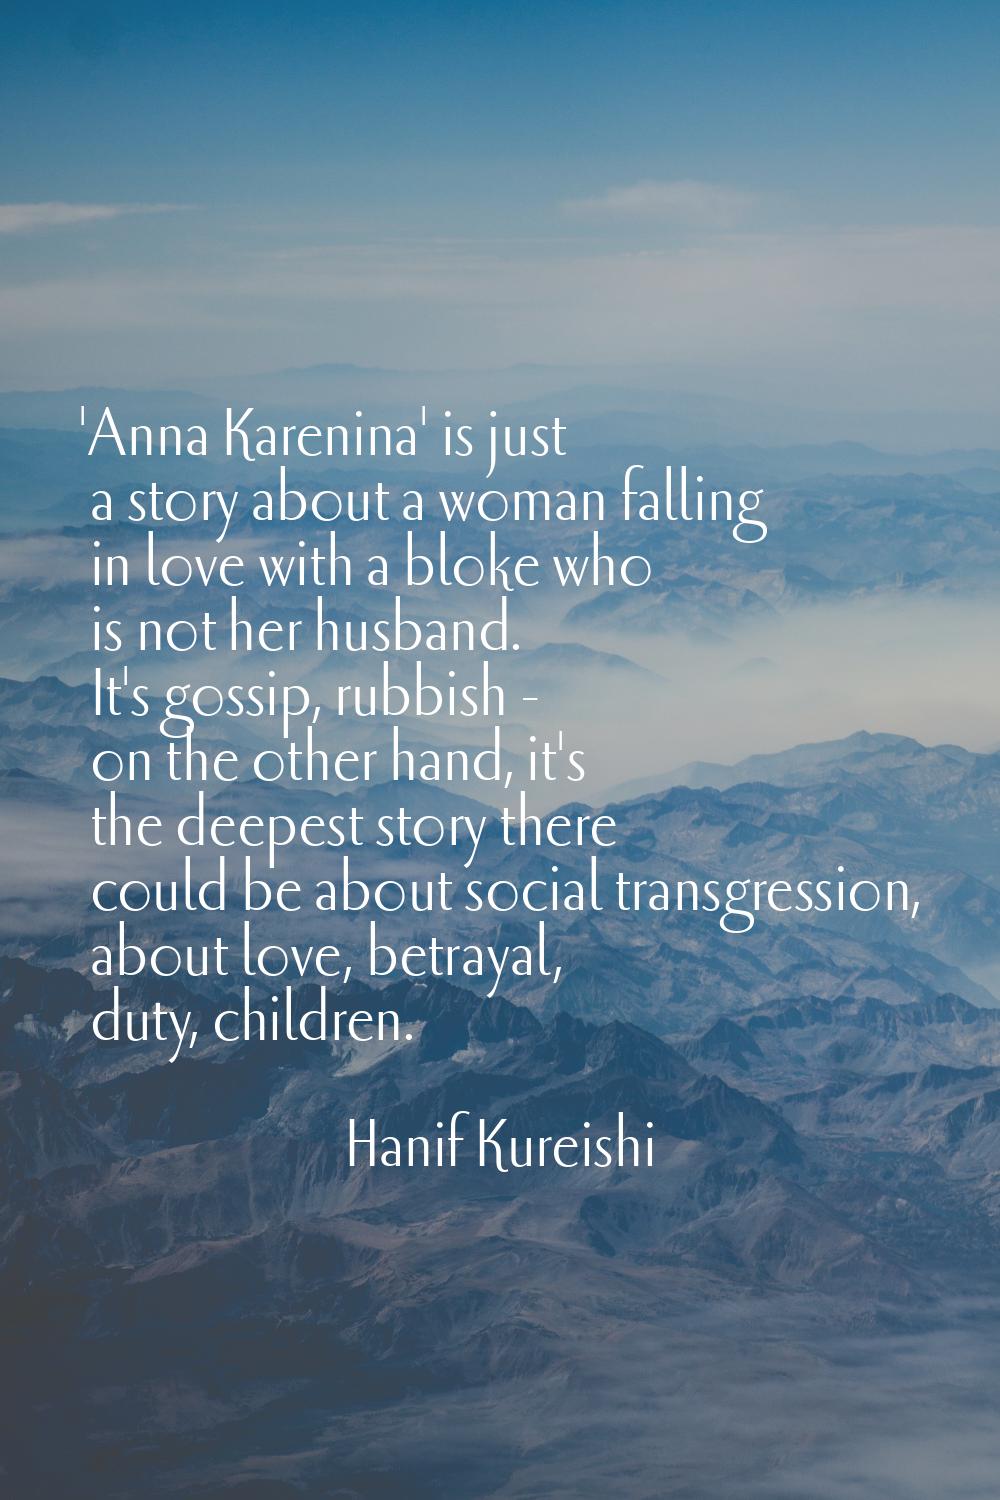 'Anna Karenina' is just a story about a woman falling in love with a bloke who is not her husband. 